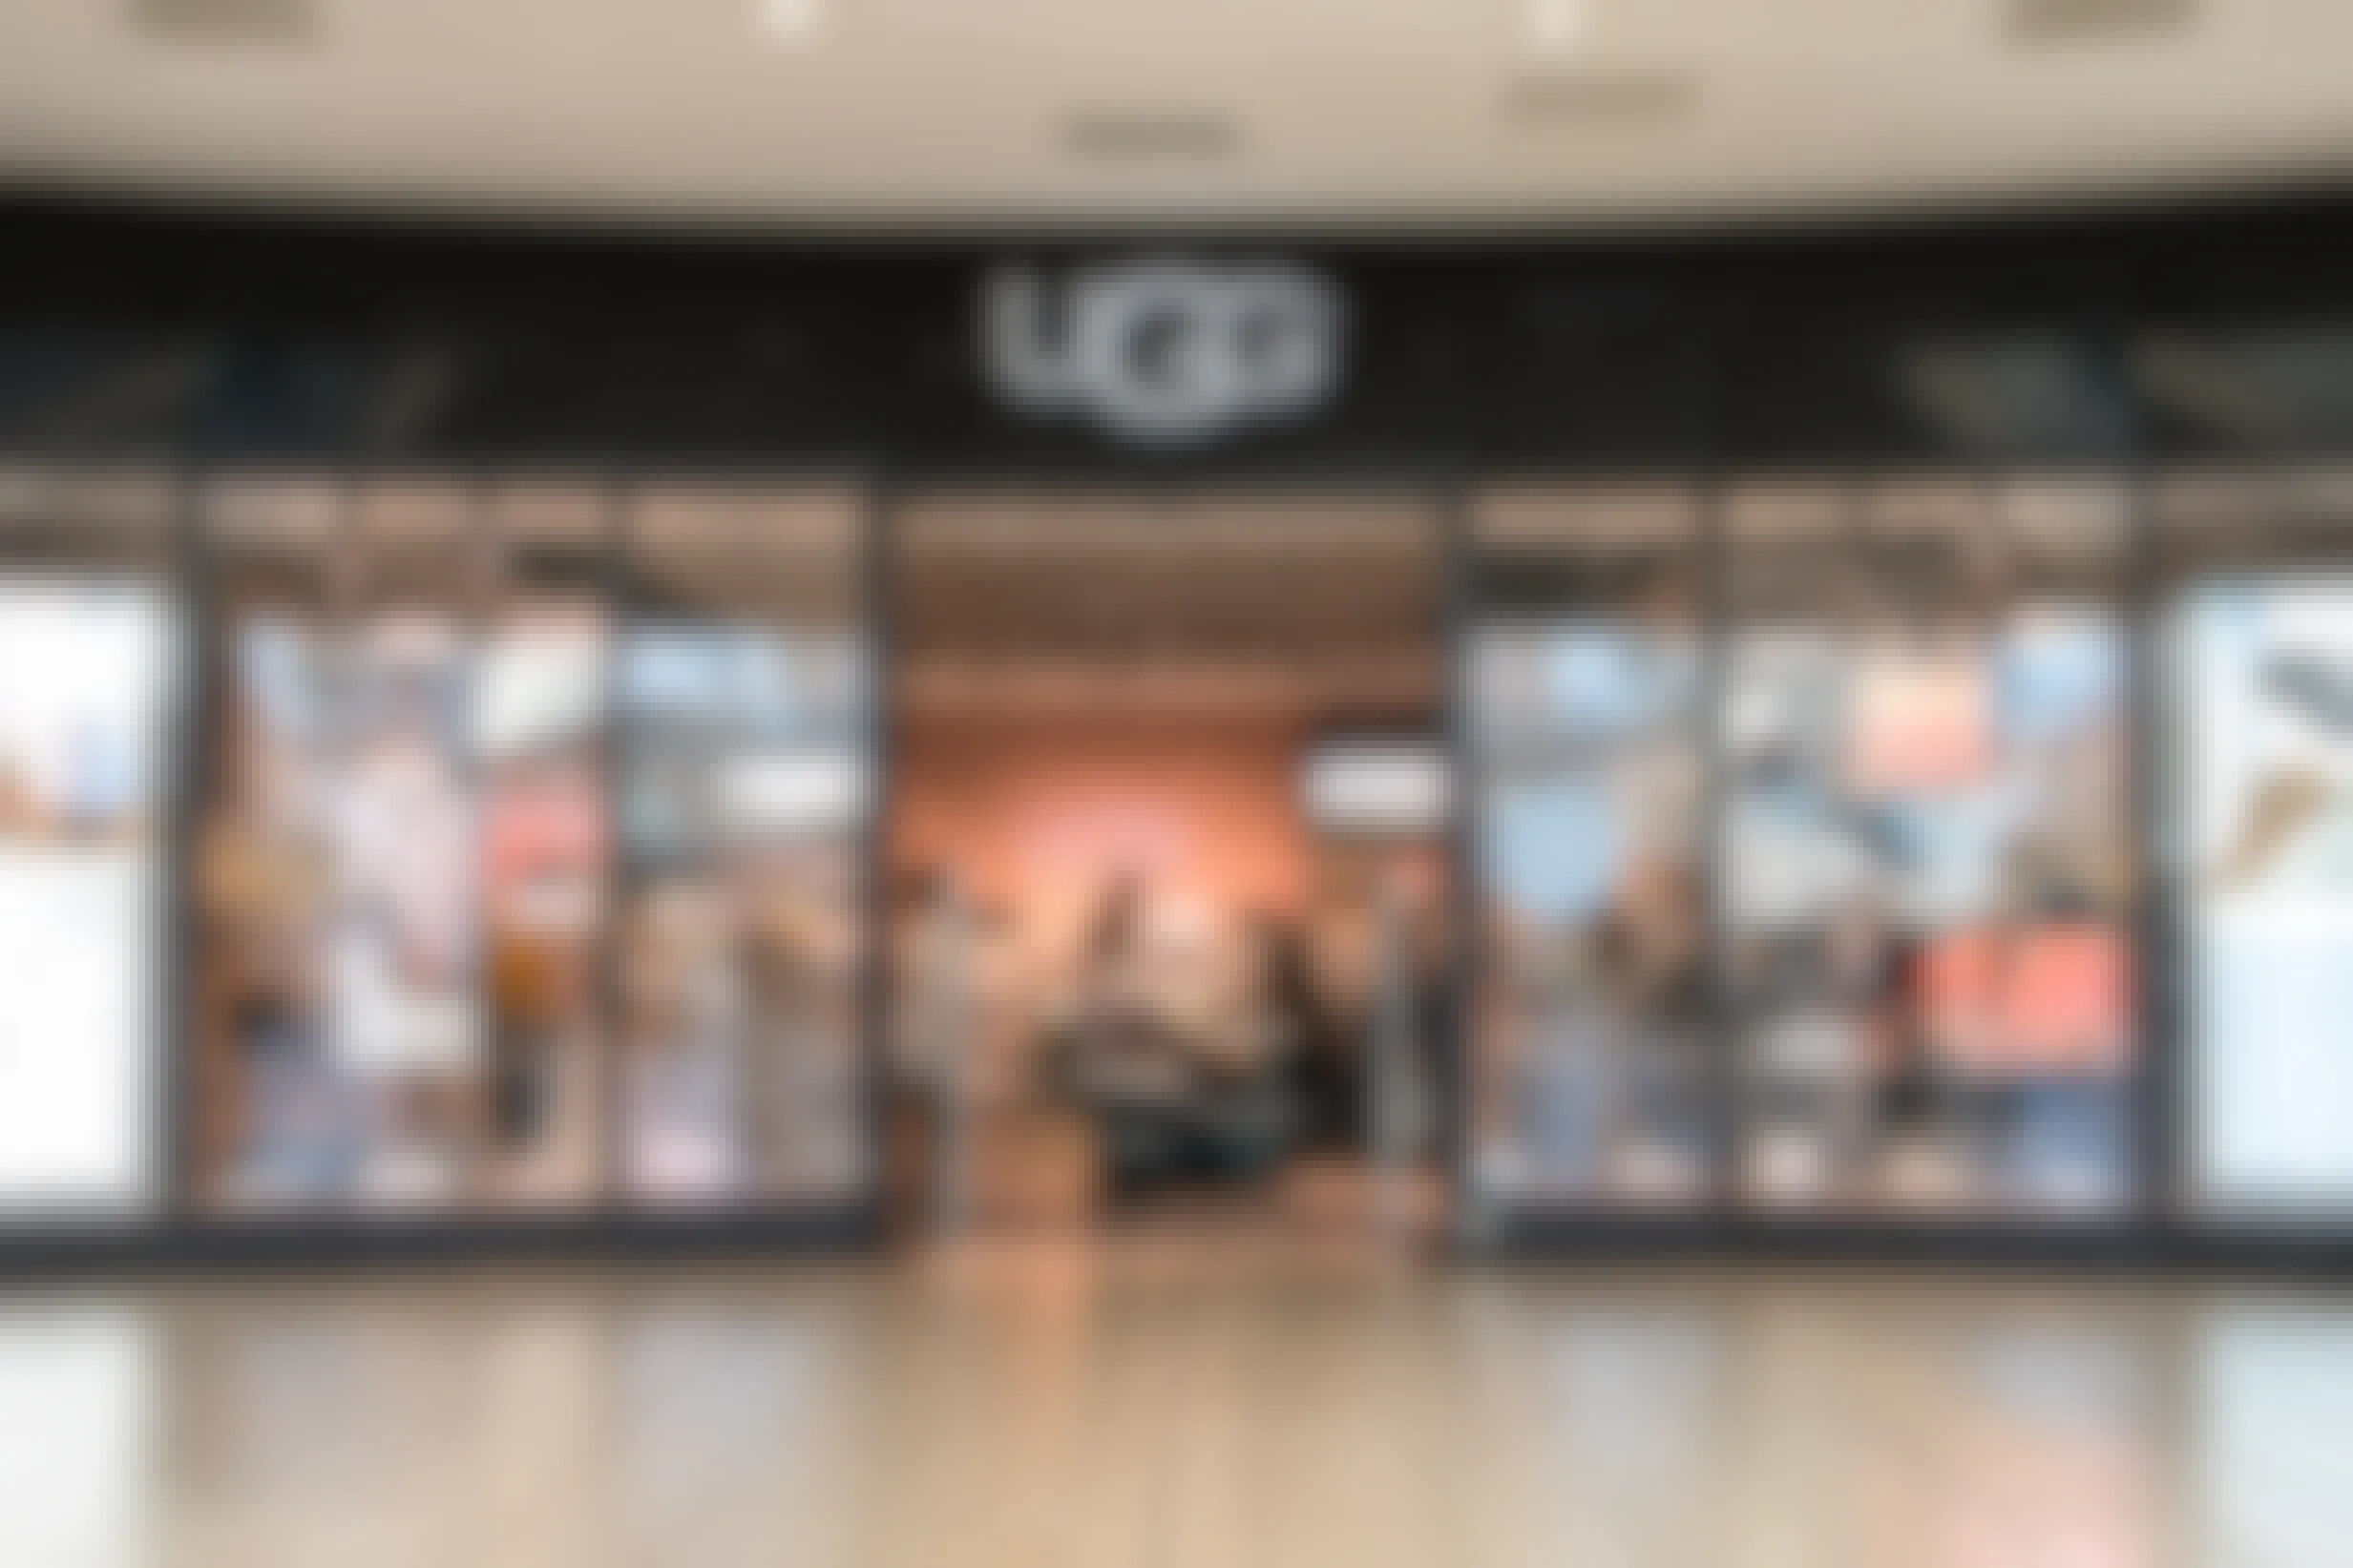 An UGG store entrance inside a mall.